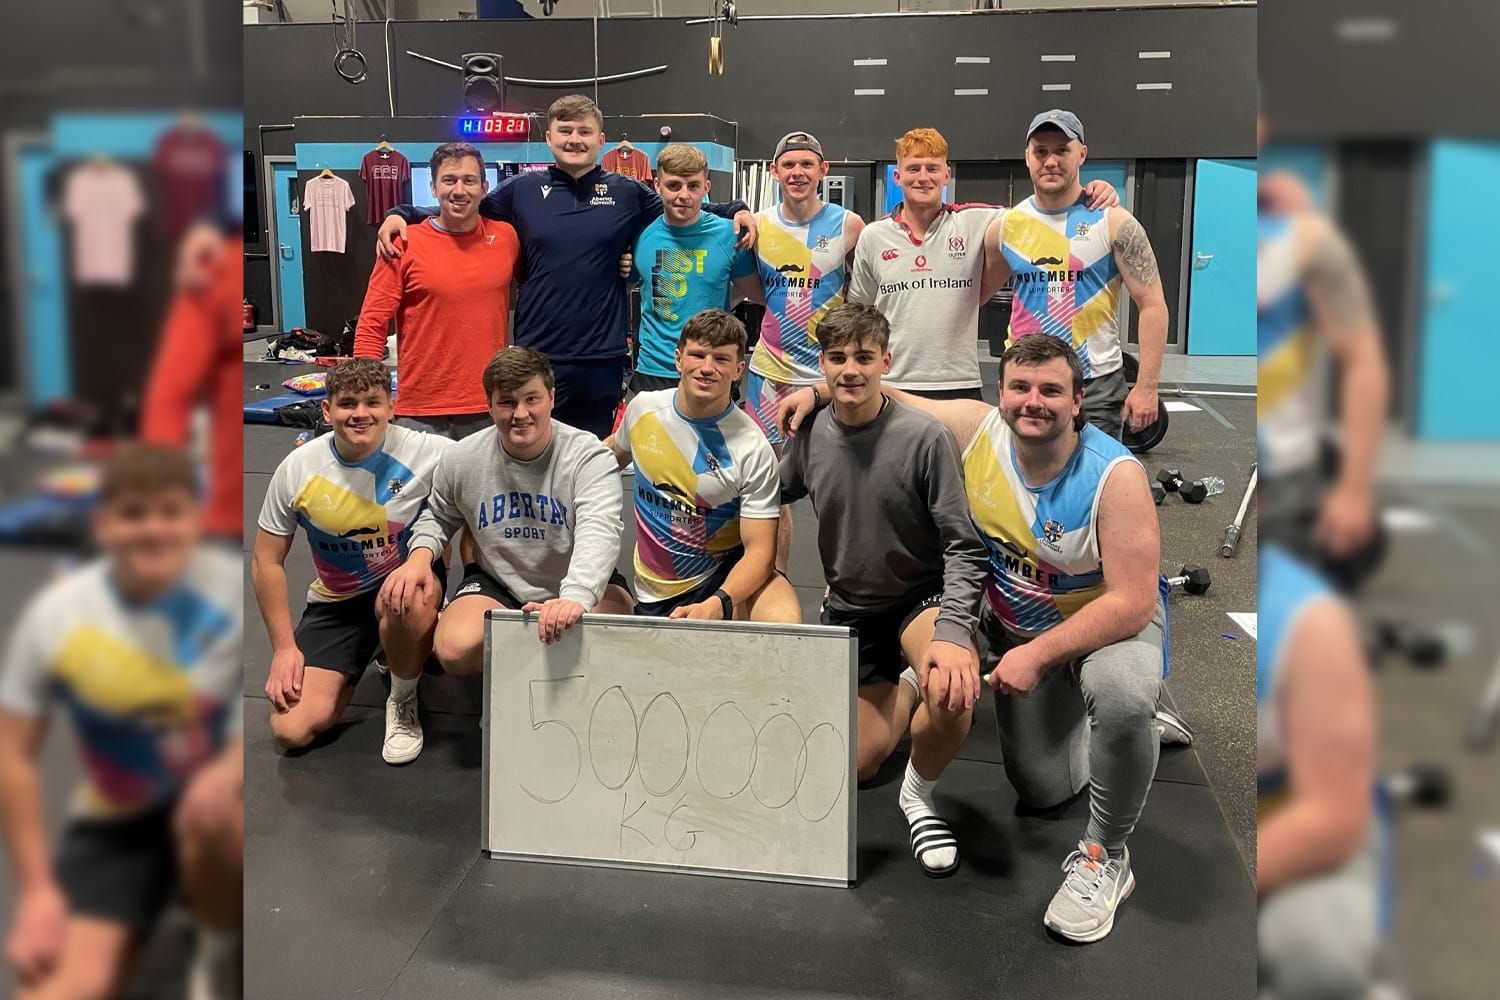 The image shows the rugby team holding a sign saying saying 500,000 kilos reached